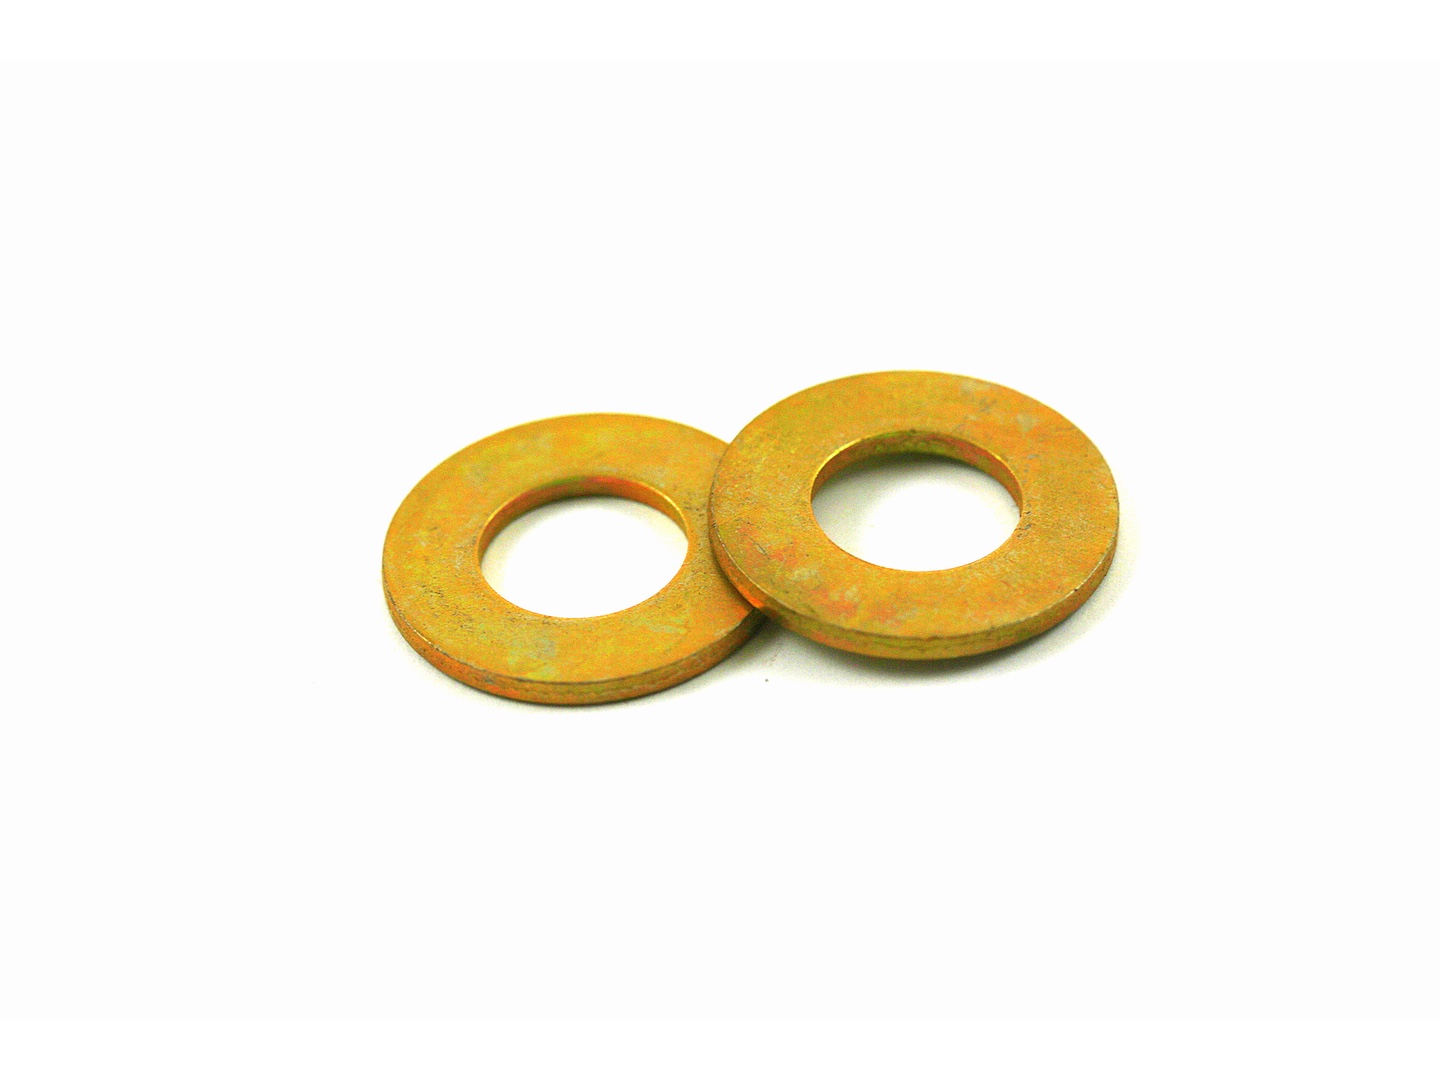 1/2" Qty 50 EA 5/8" Grade 8 Extra Thick SAE Flat Washers 150 TOTAL 7/16" 